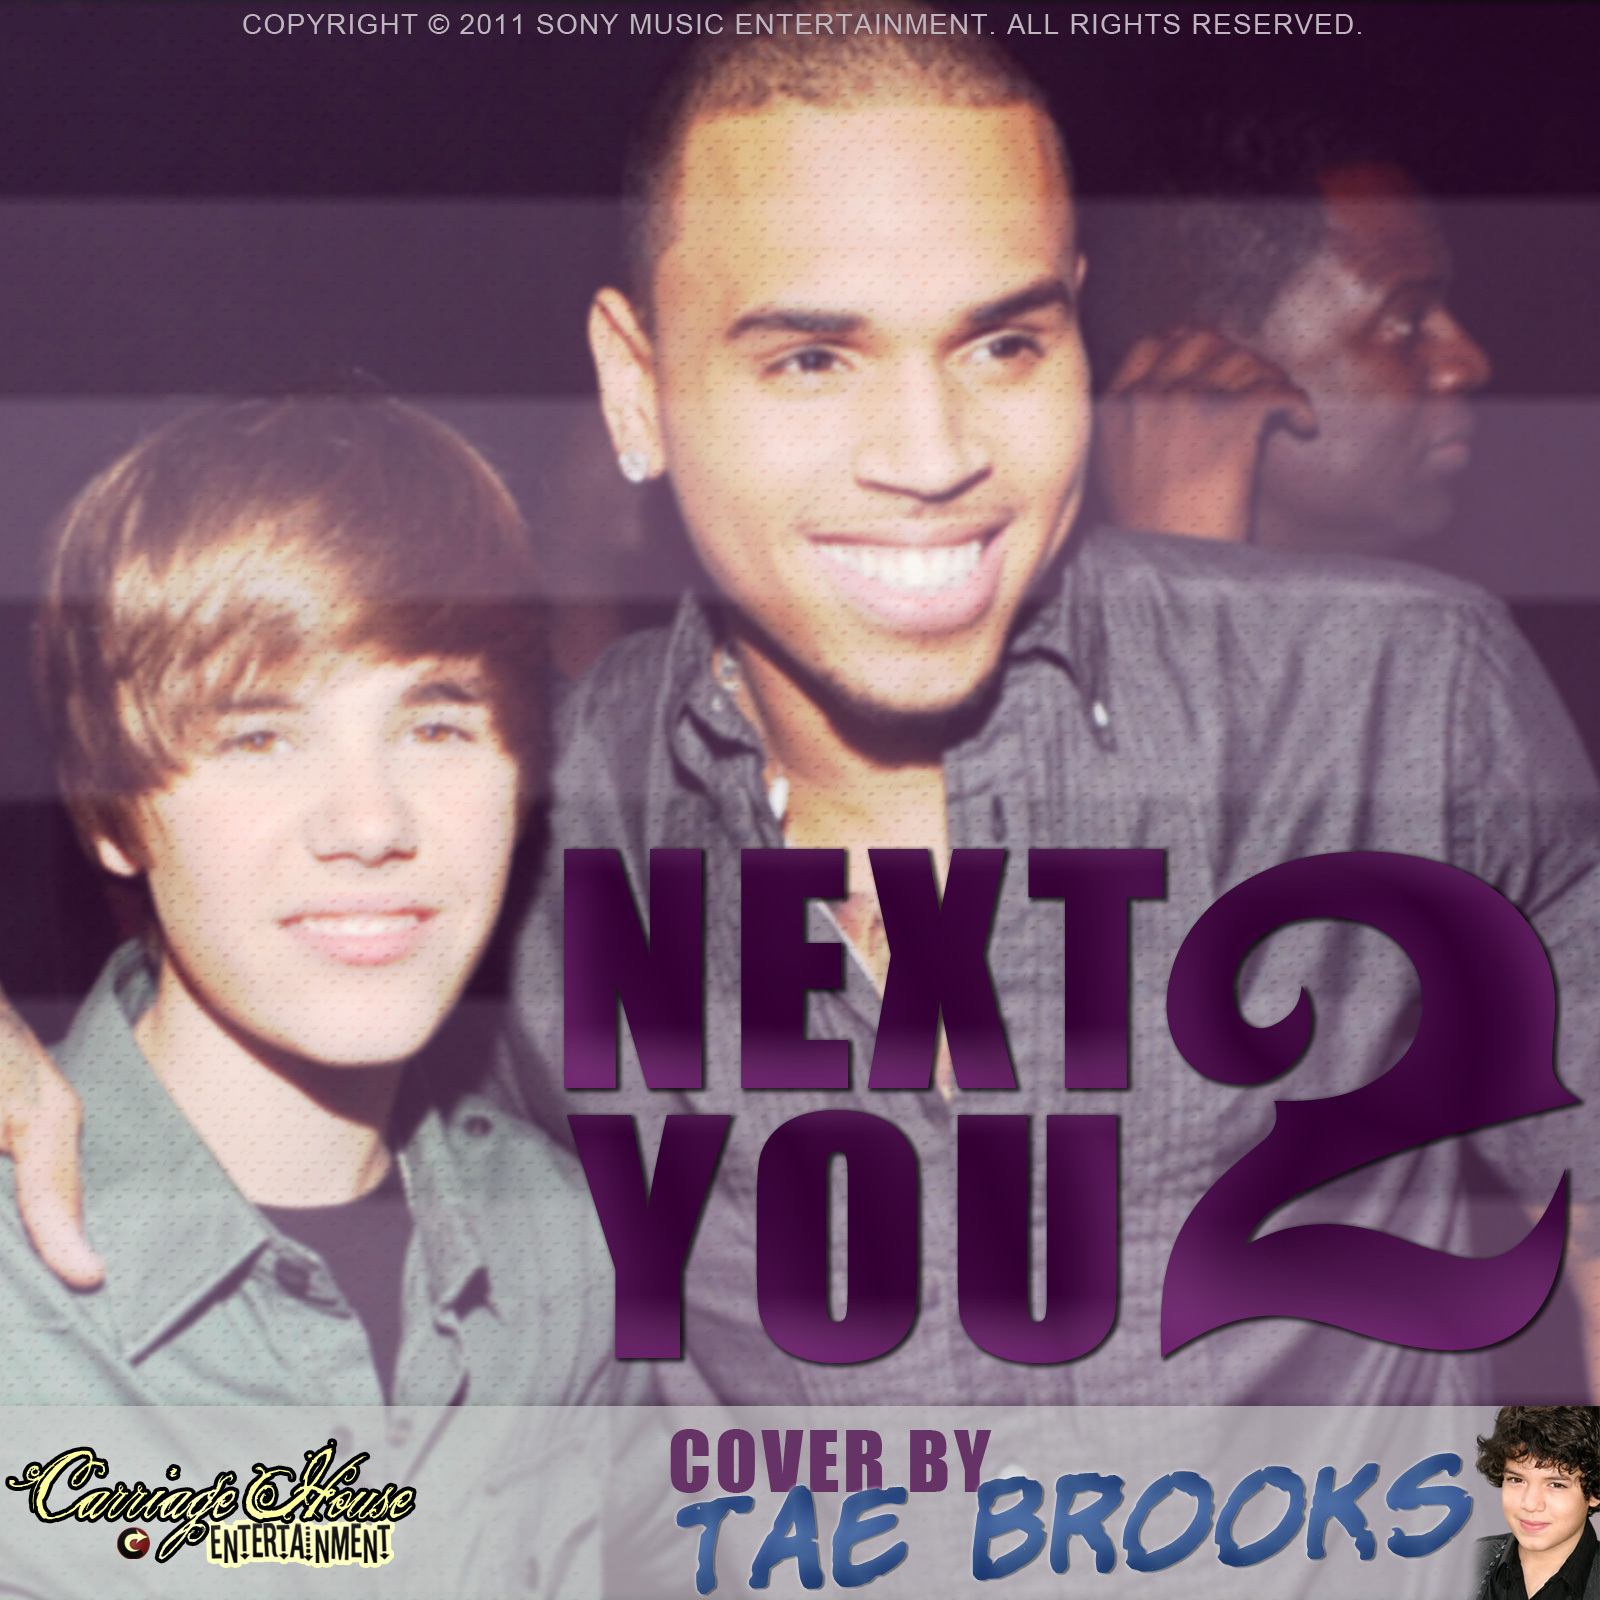 Chris Brown Ft Justin Bieber Next 2 You Next To You Cover By Tae Brooks Chris Brown Fan